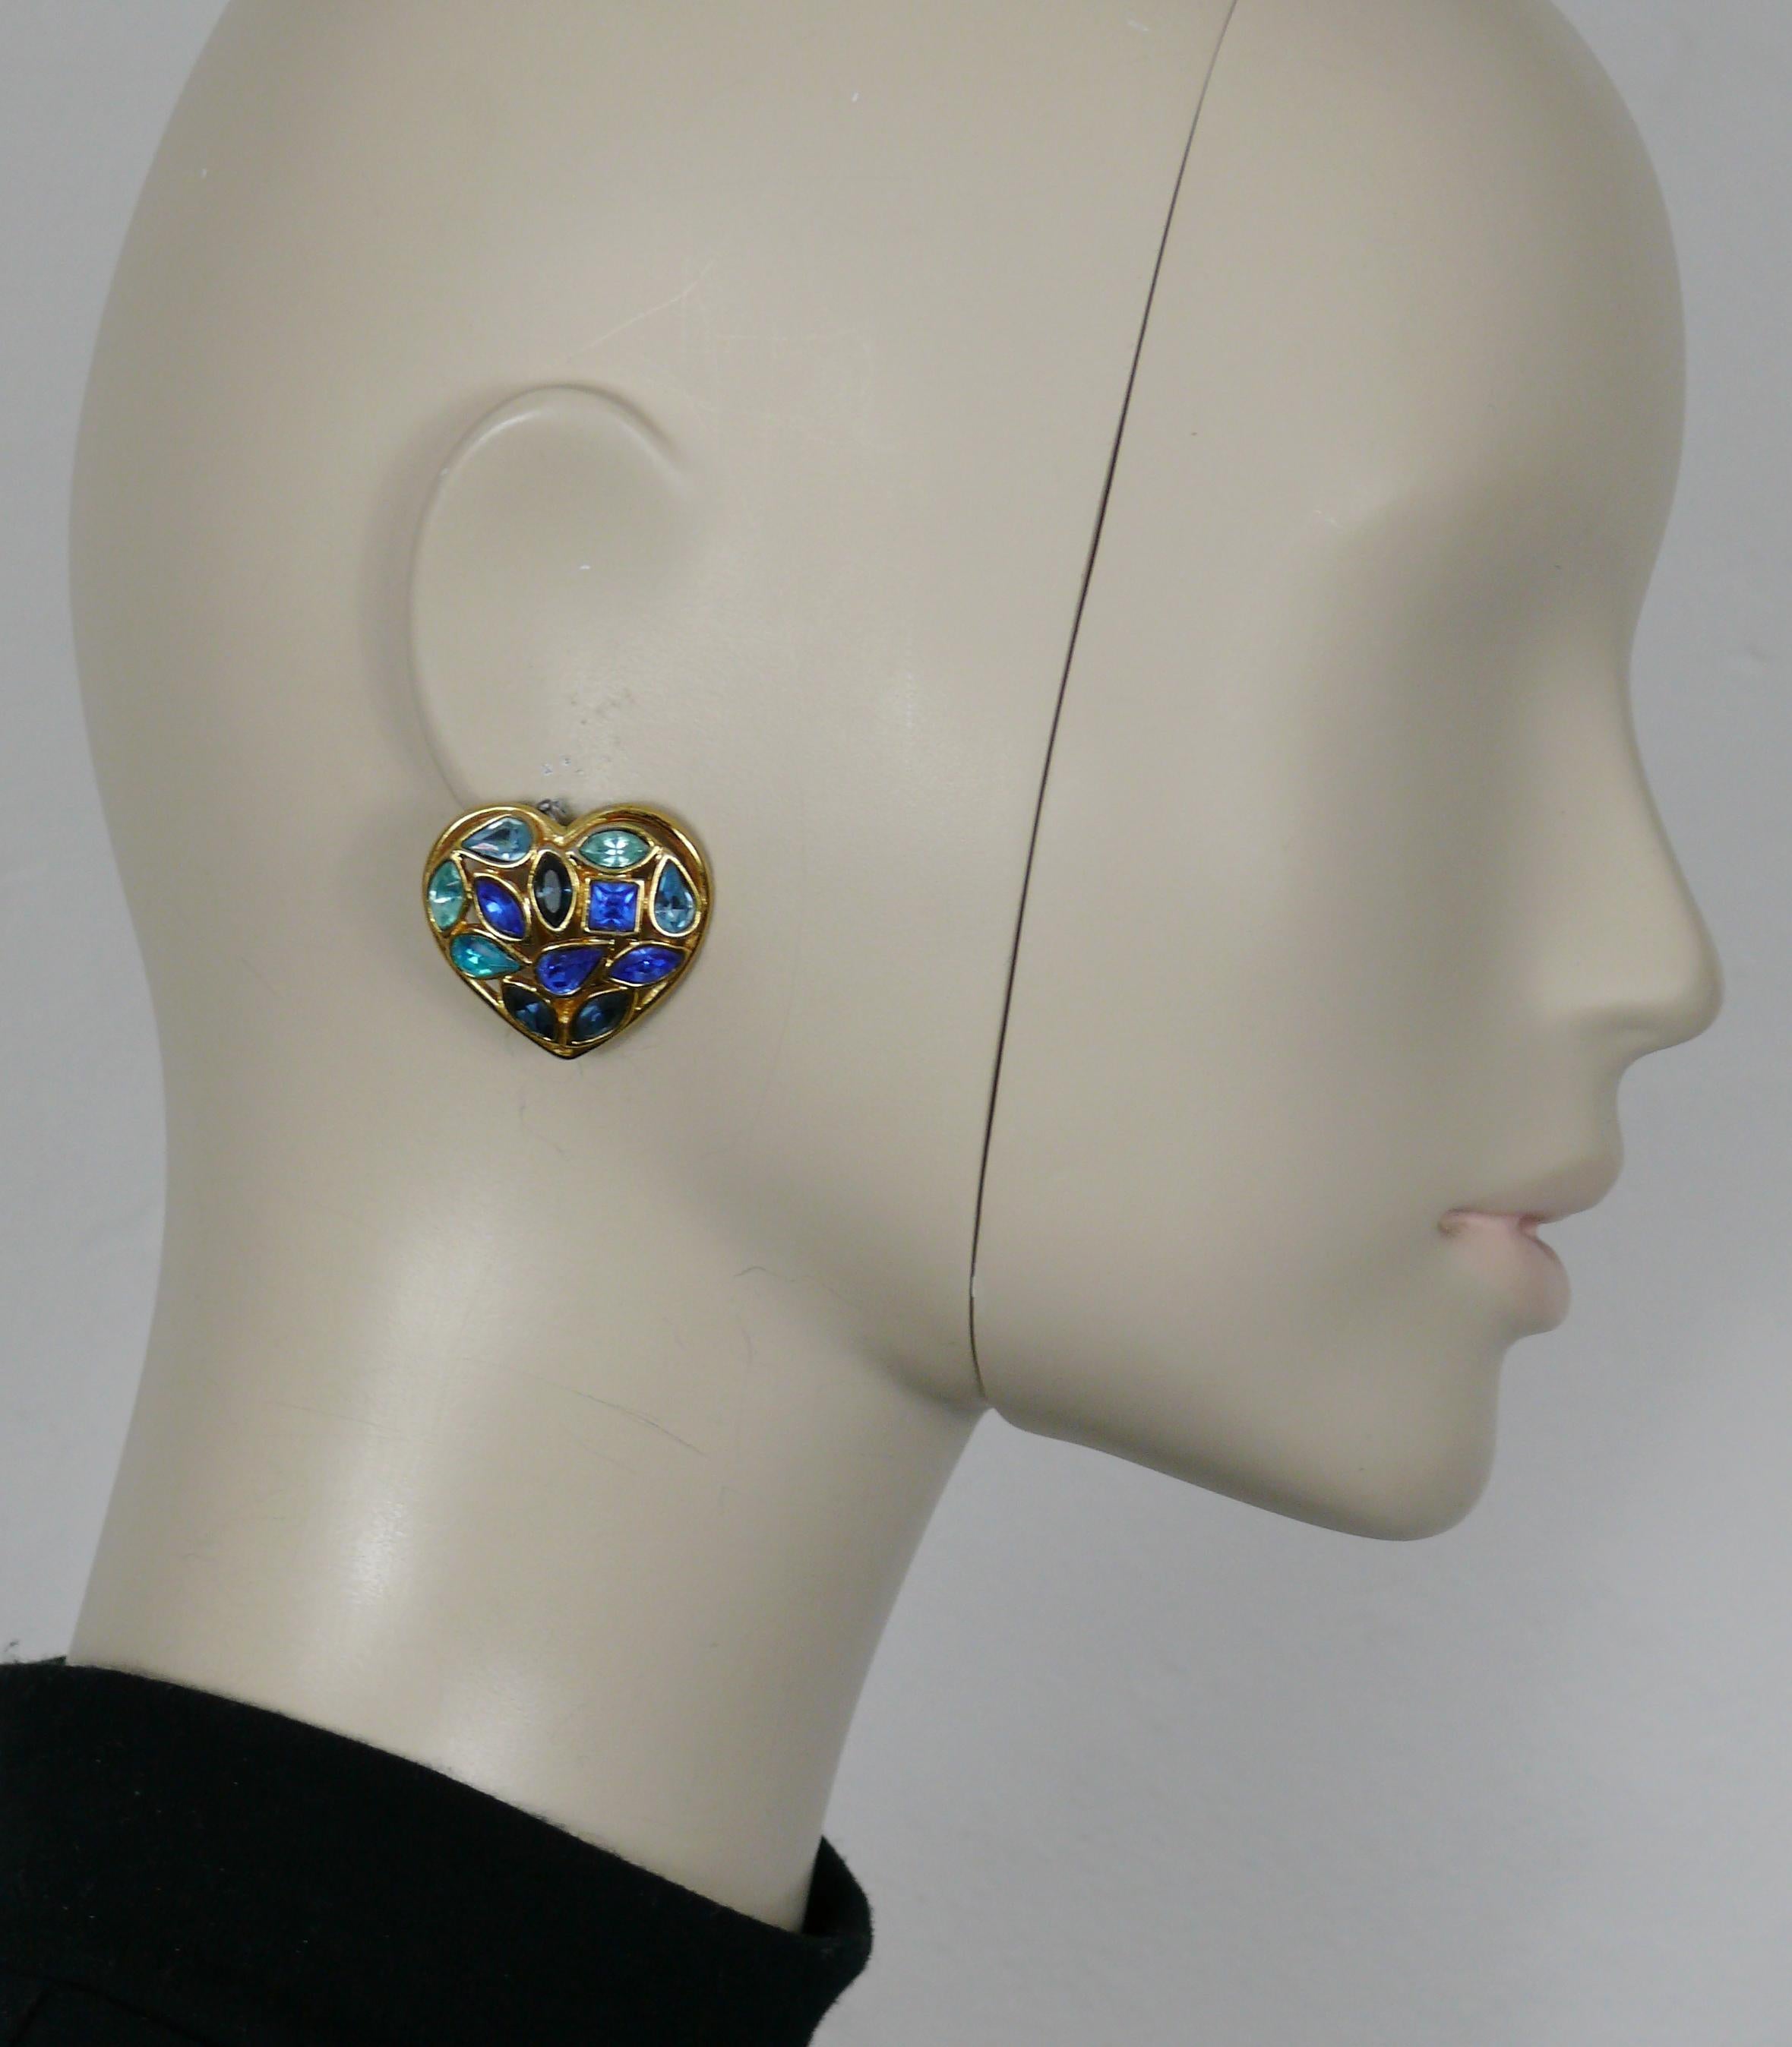 YVES SAINT LAURENT vintage gold tone heart clip-on earrings embellished with blue shade crystals.

Embossed YSL Made in France.

Indicative measurements : max. height approx. 2.9 cm (1.14 inches) / max. width approx. 3.2 cm (1.26 inches).

Weight